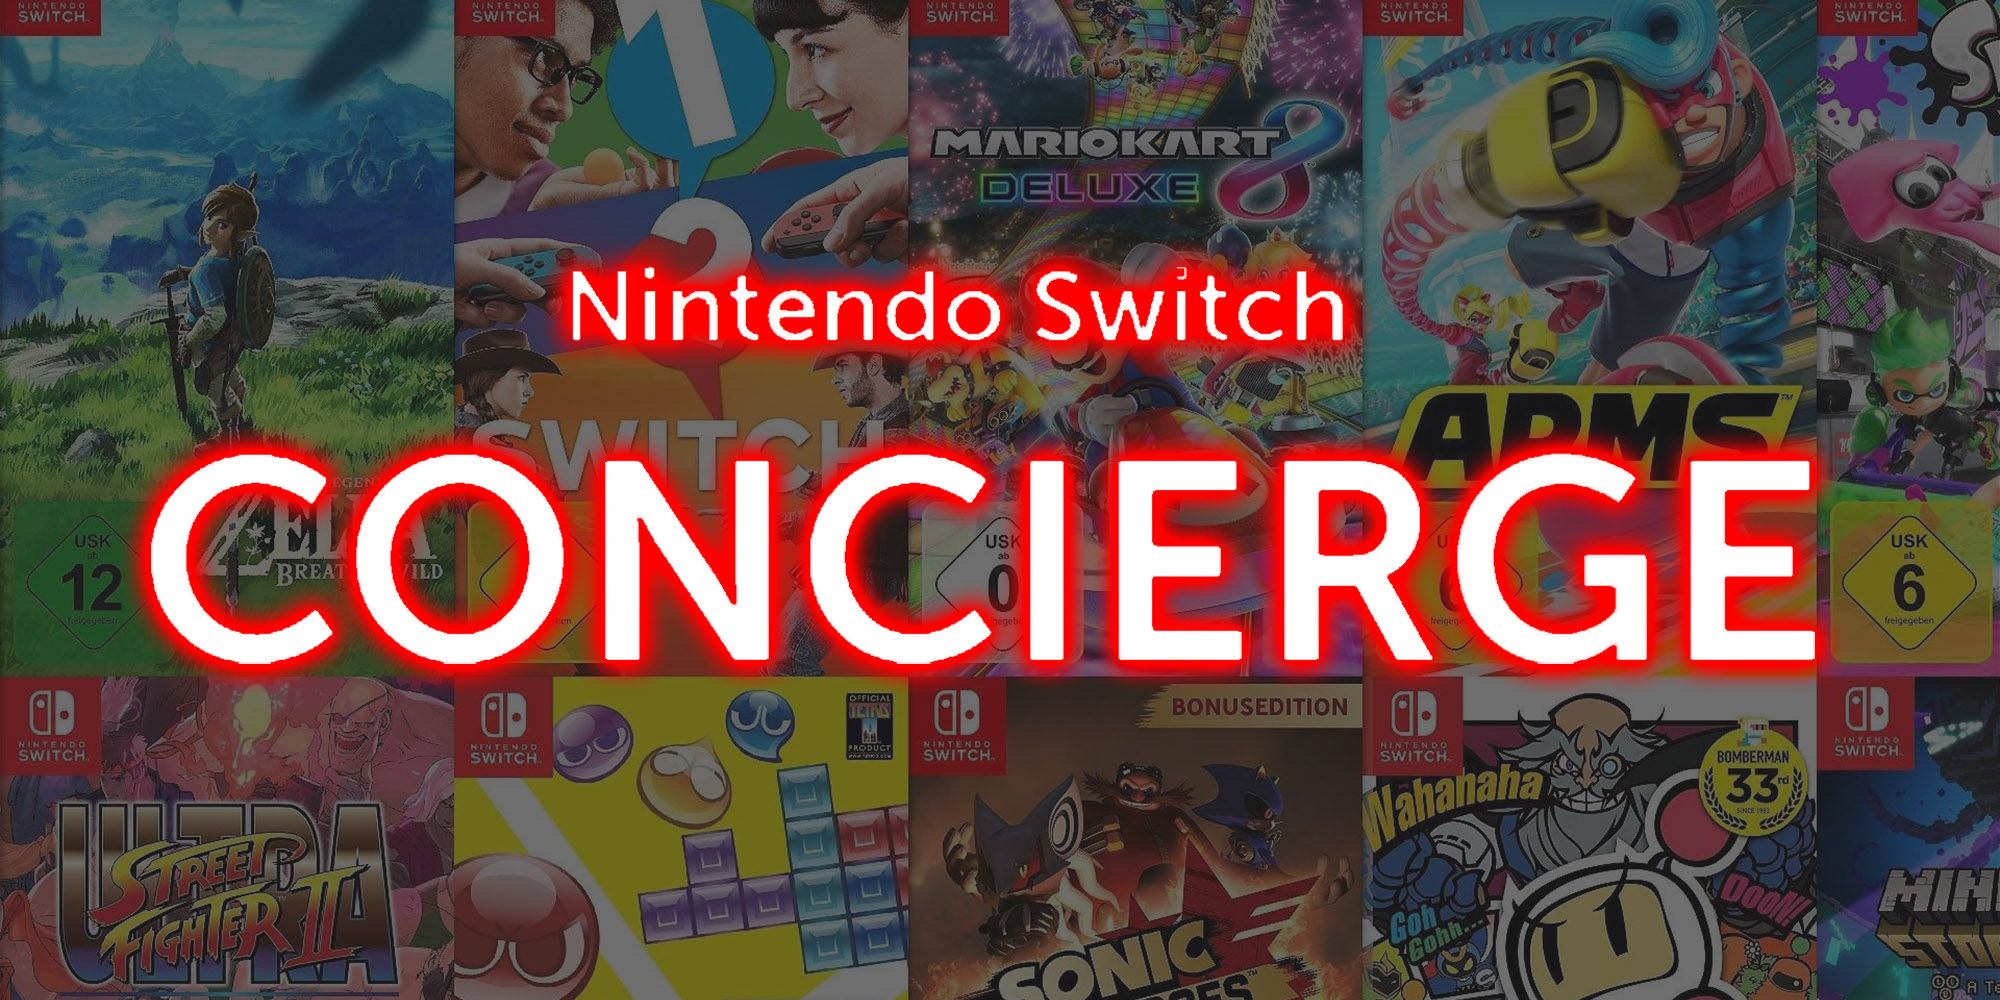 Nintendo’s Switch Concierge concept must be on all platforms